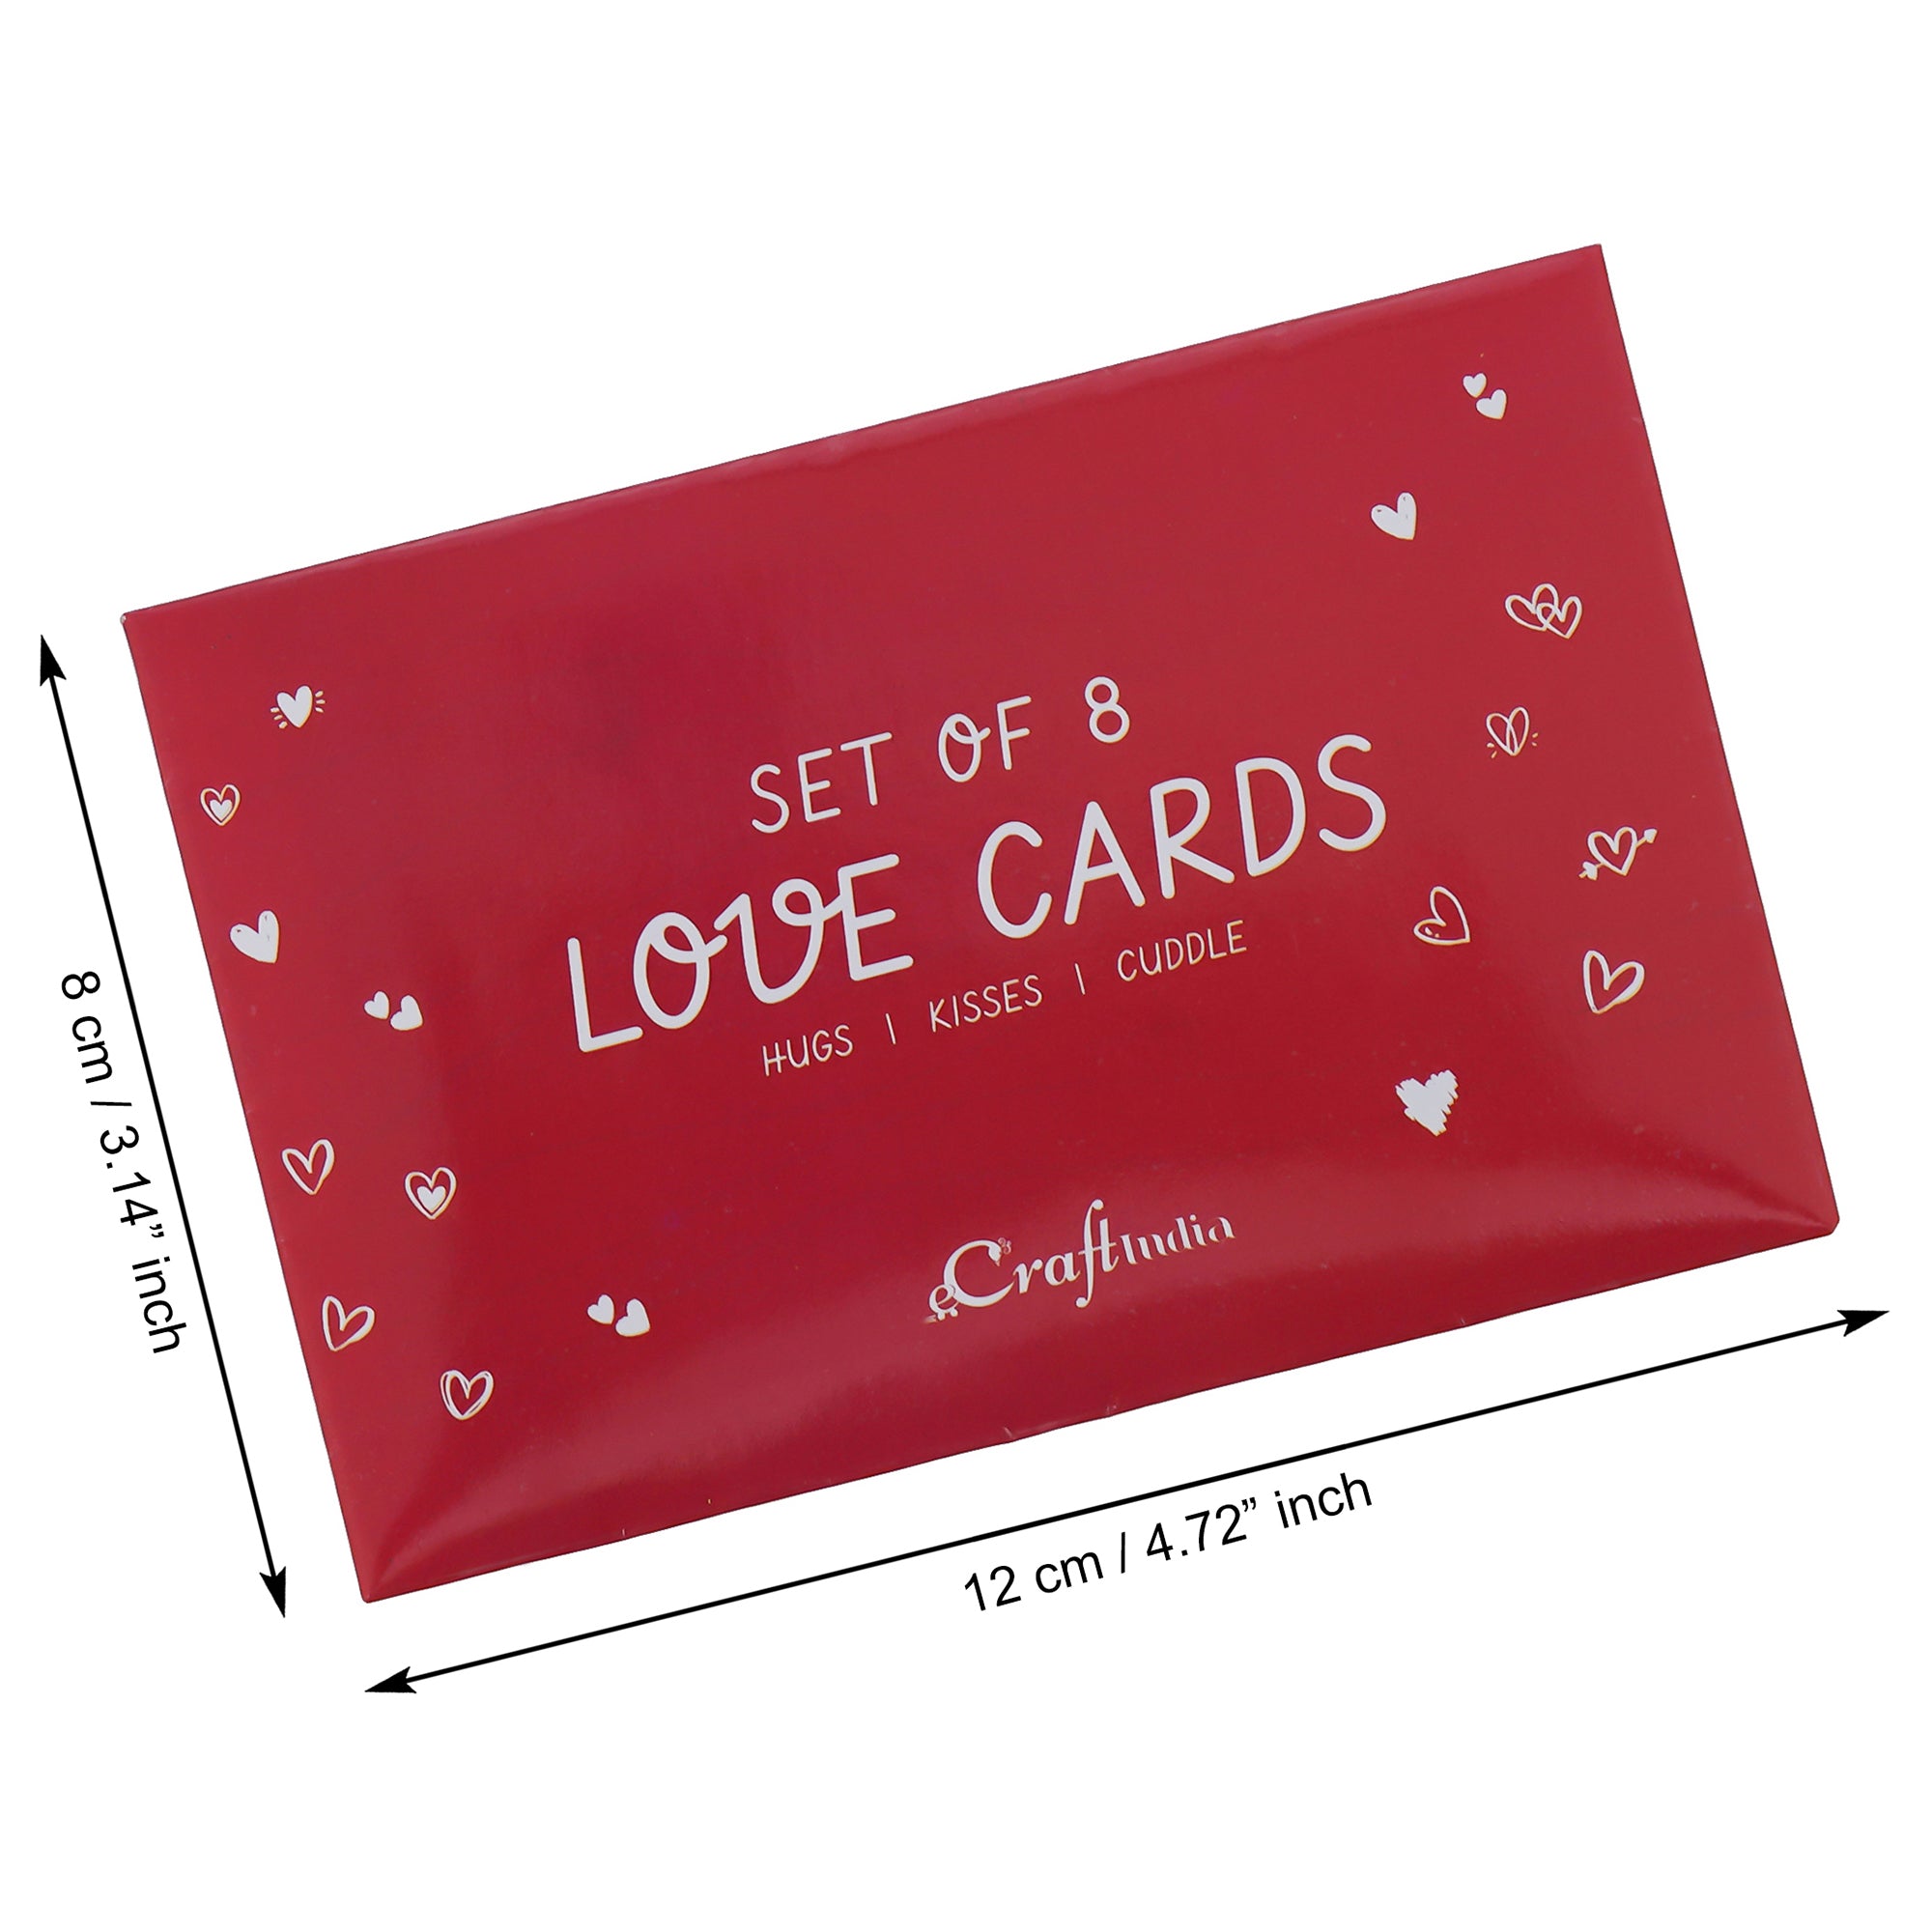 Valentine Combo of Pack of 8 Love Gift Cards, Golden Rose Gift Set, "20 Reasons Why I Love You" Printed on Little Red Hearts Decorative Wooden Gift Set Box 2